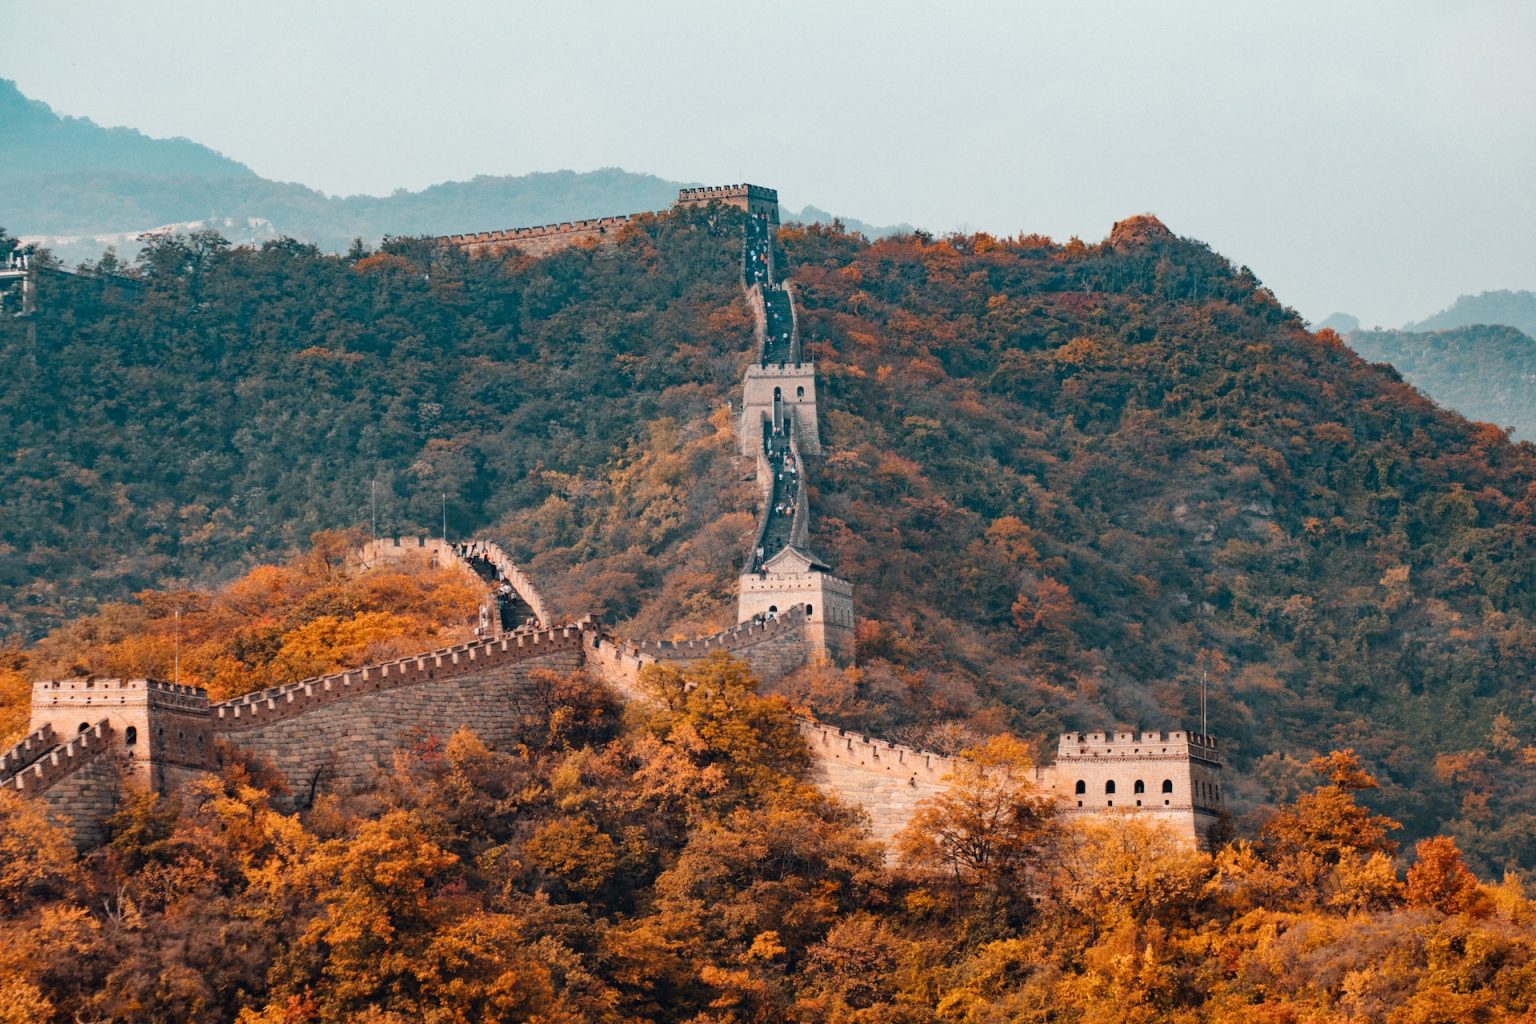 A photo depicting the great wall of china.